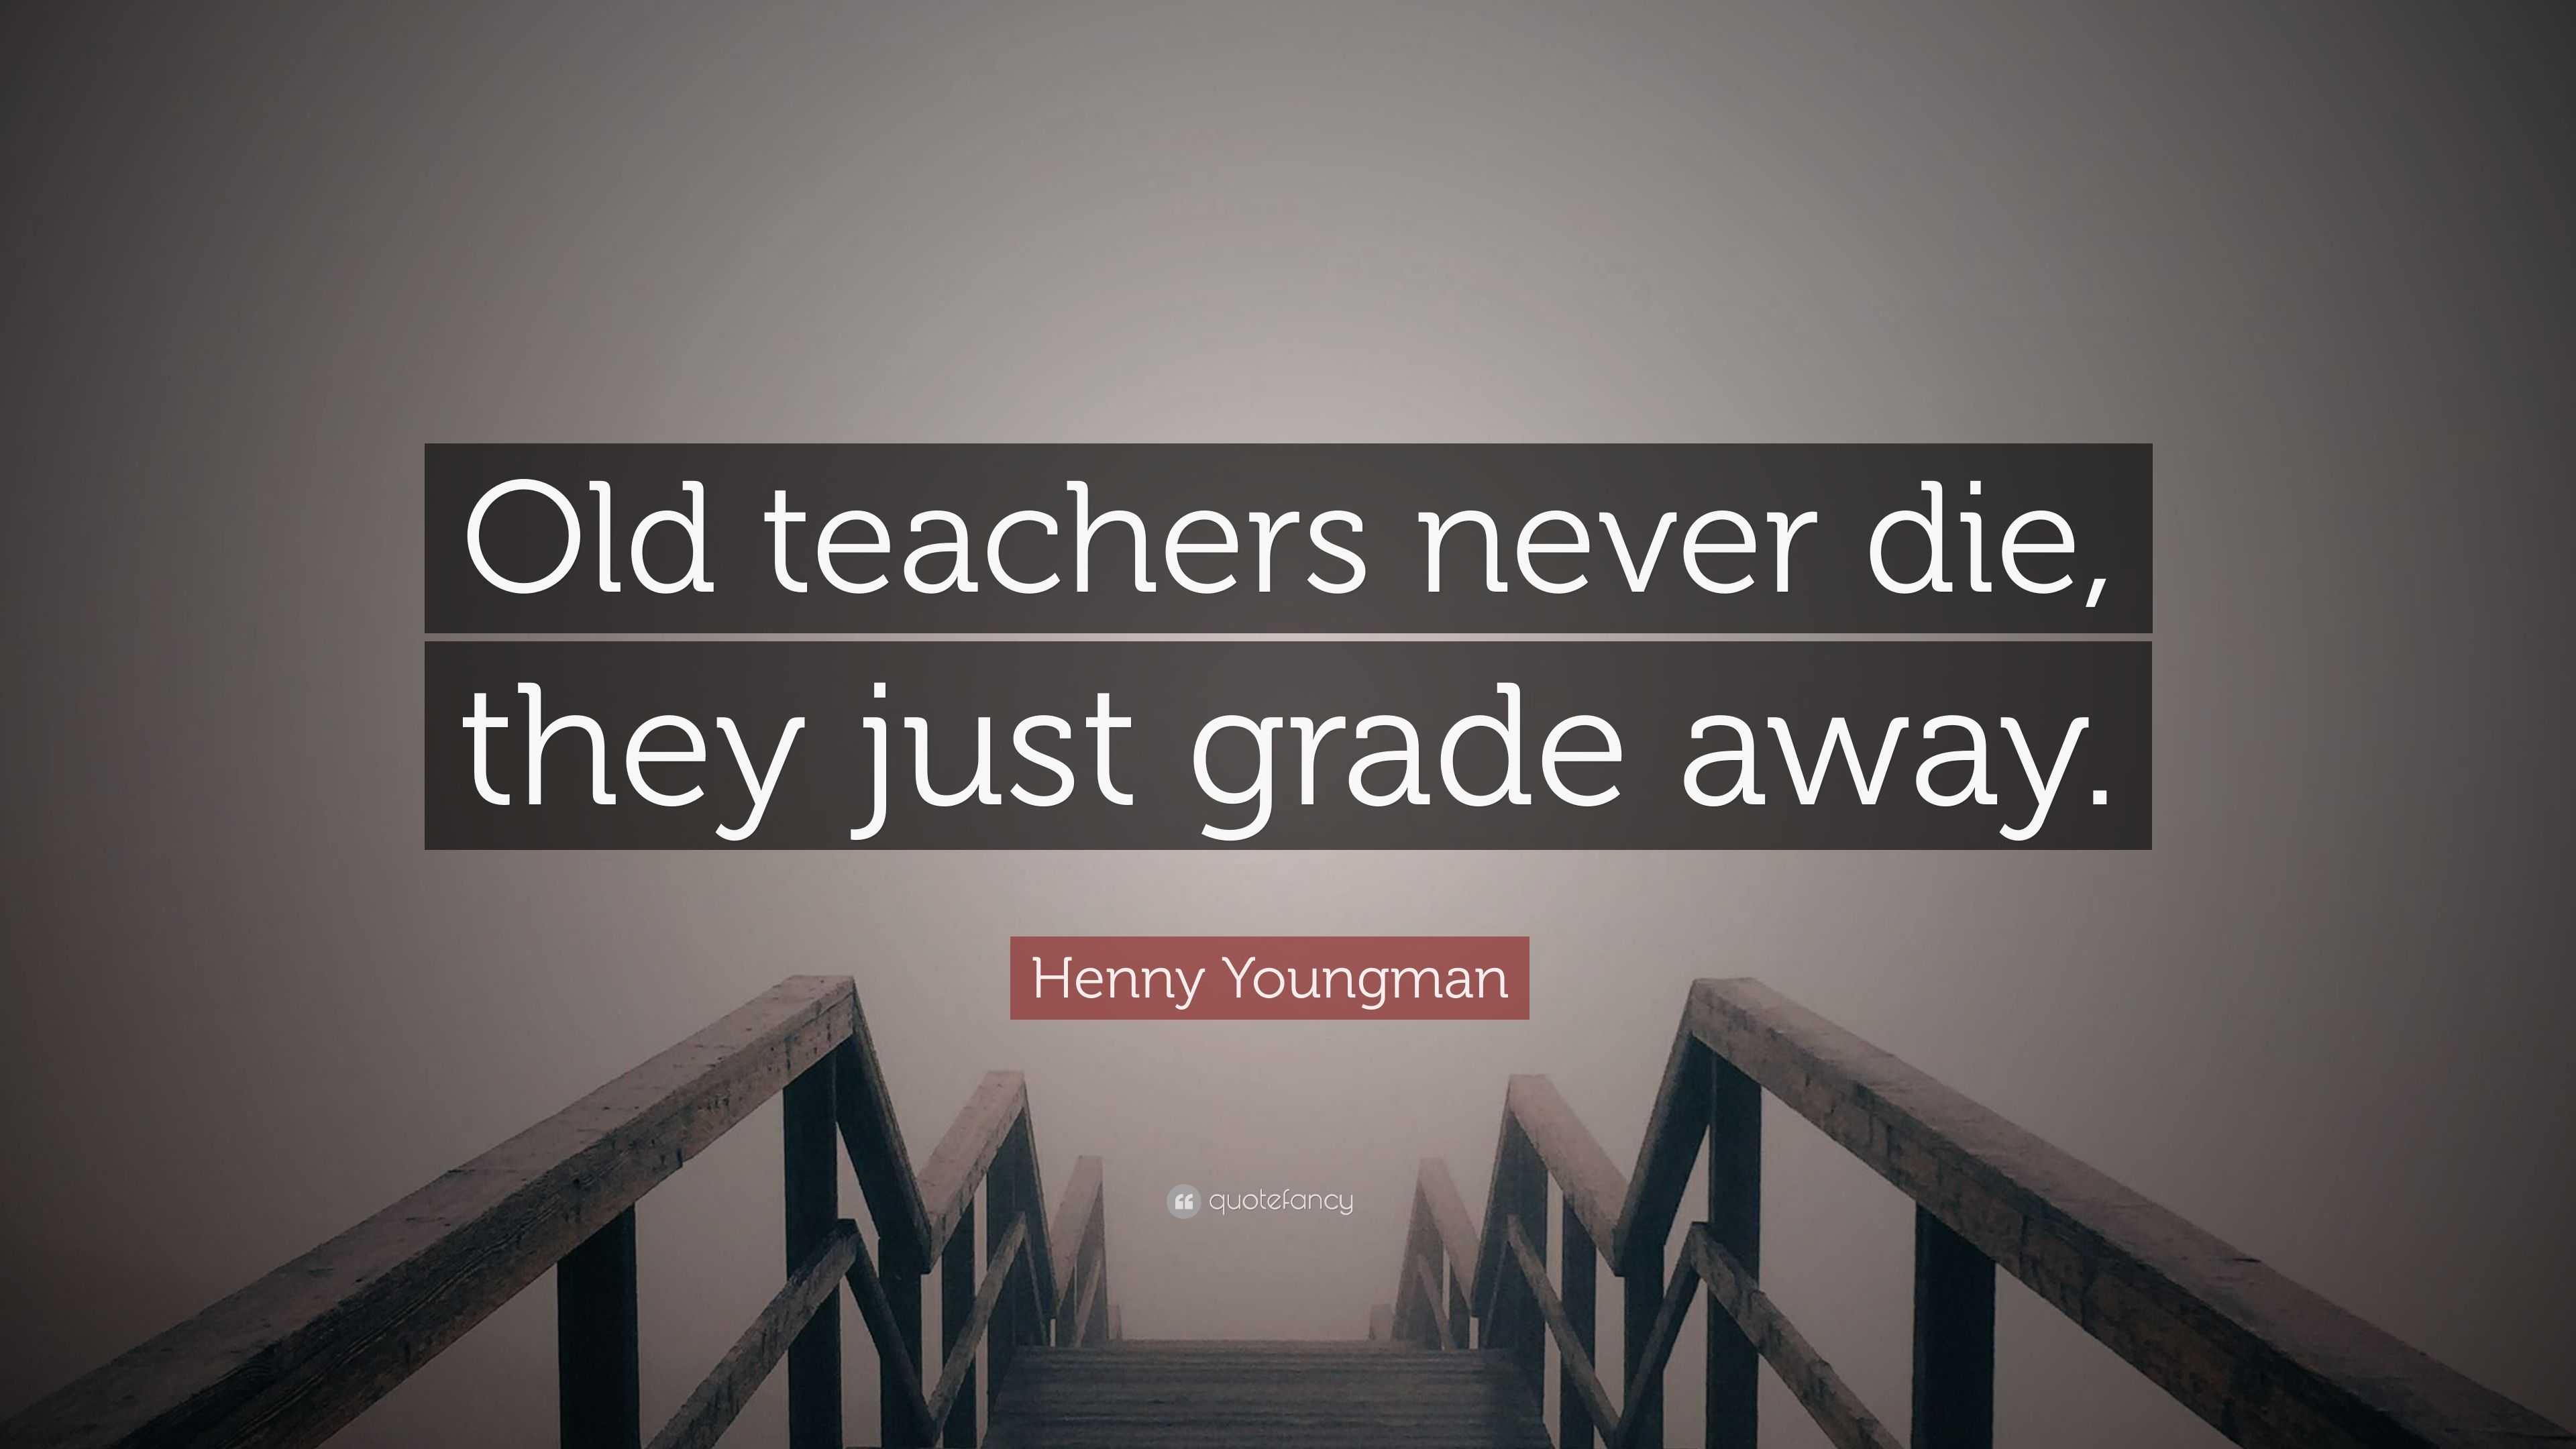 Henny Youngman Quote: “Old teachers never die, they just grade away.”